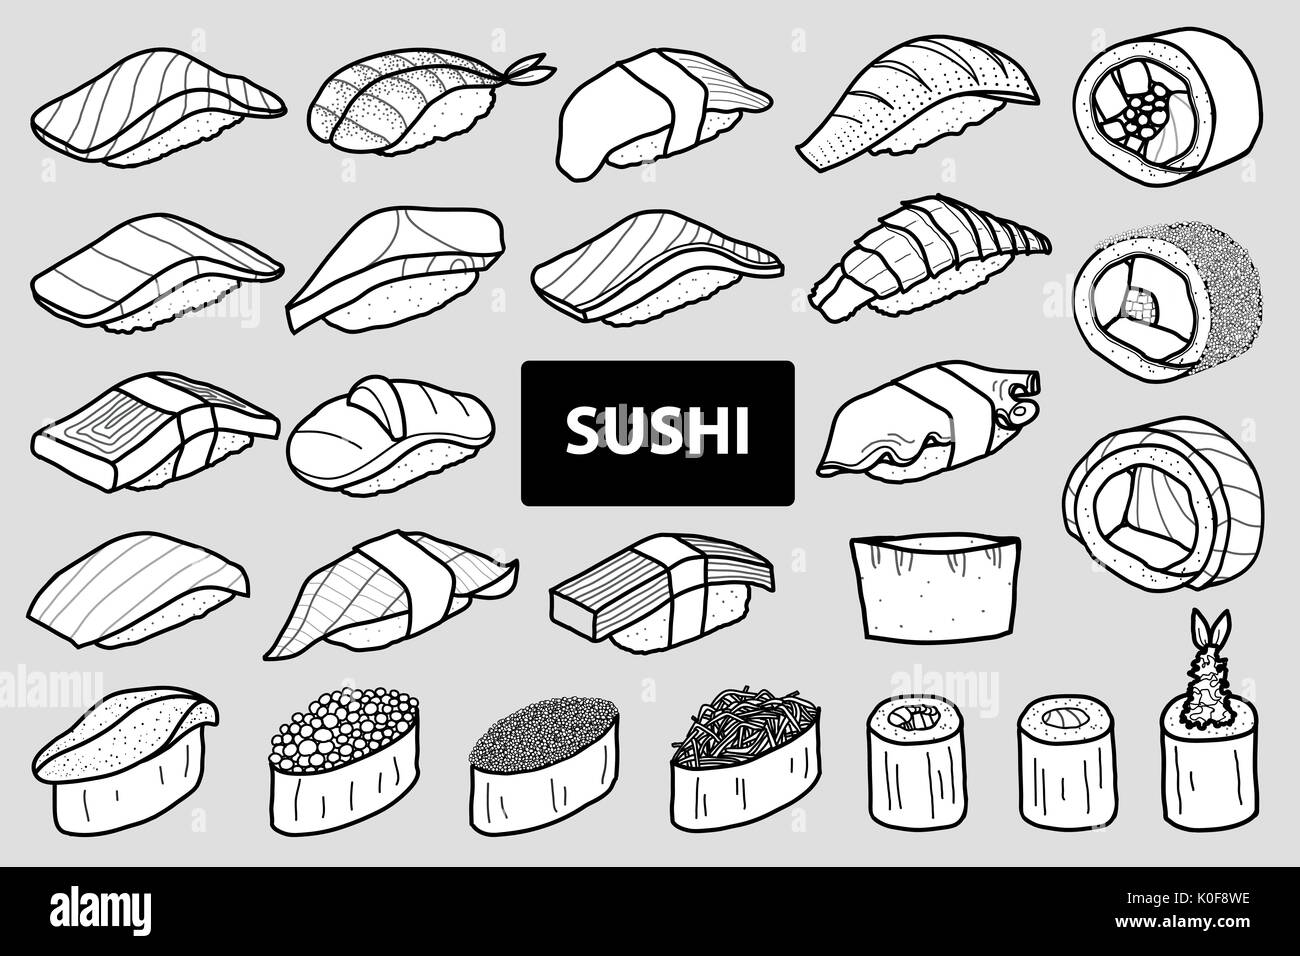 Set of 25 isolated sushi and roll in black outline and white plane. Cute japanese food illustration hand drawn style. Stock Vector